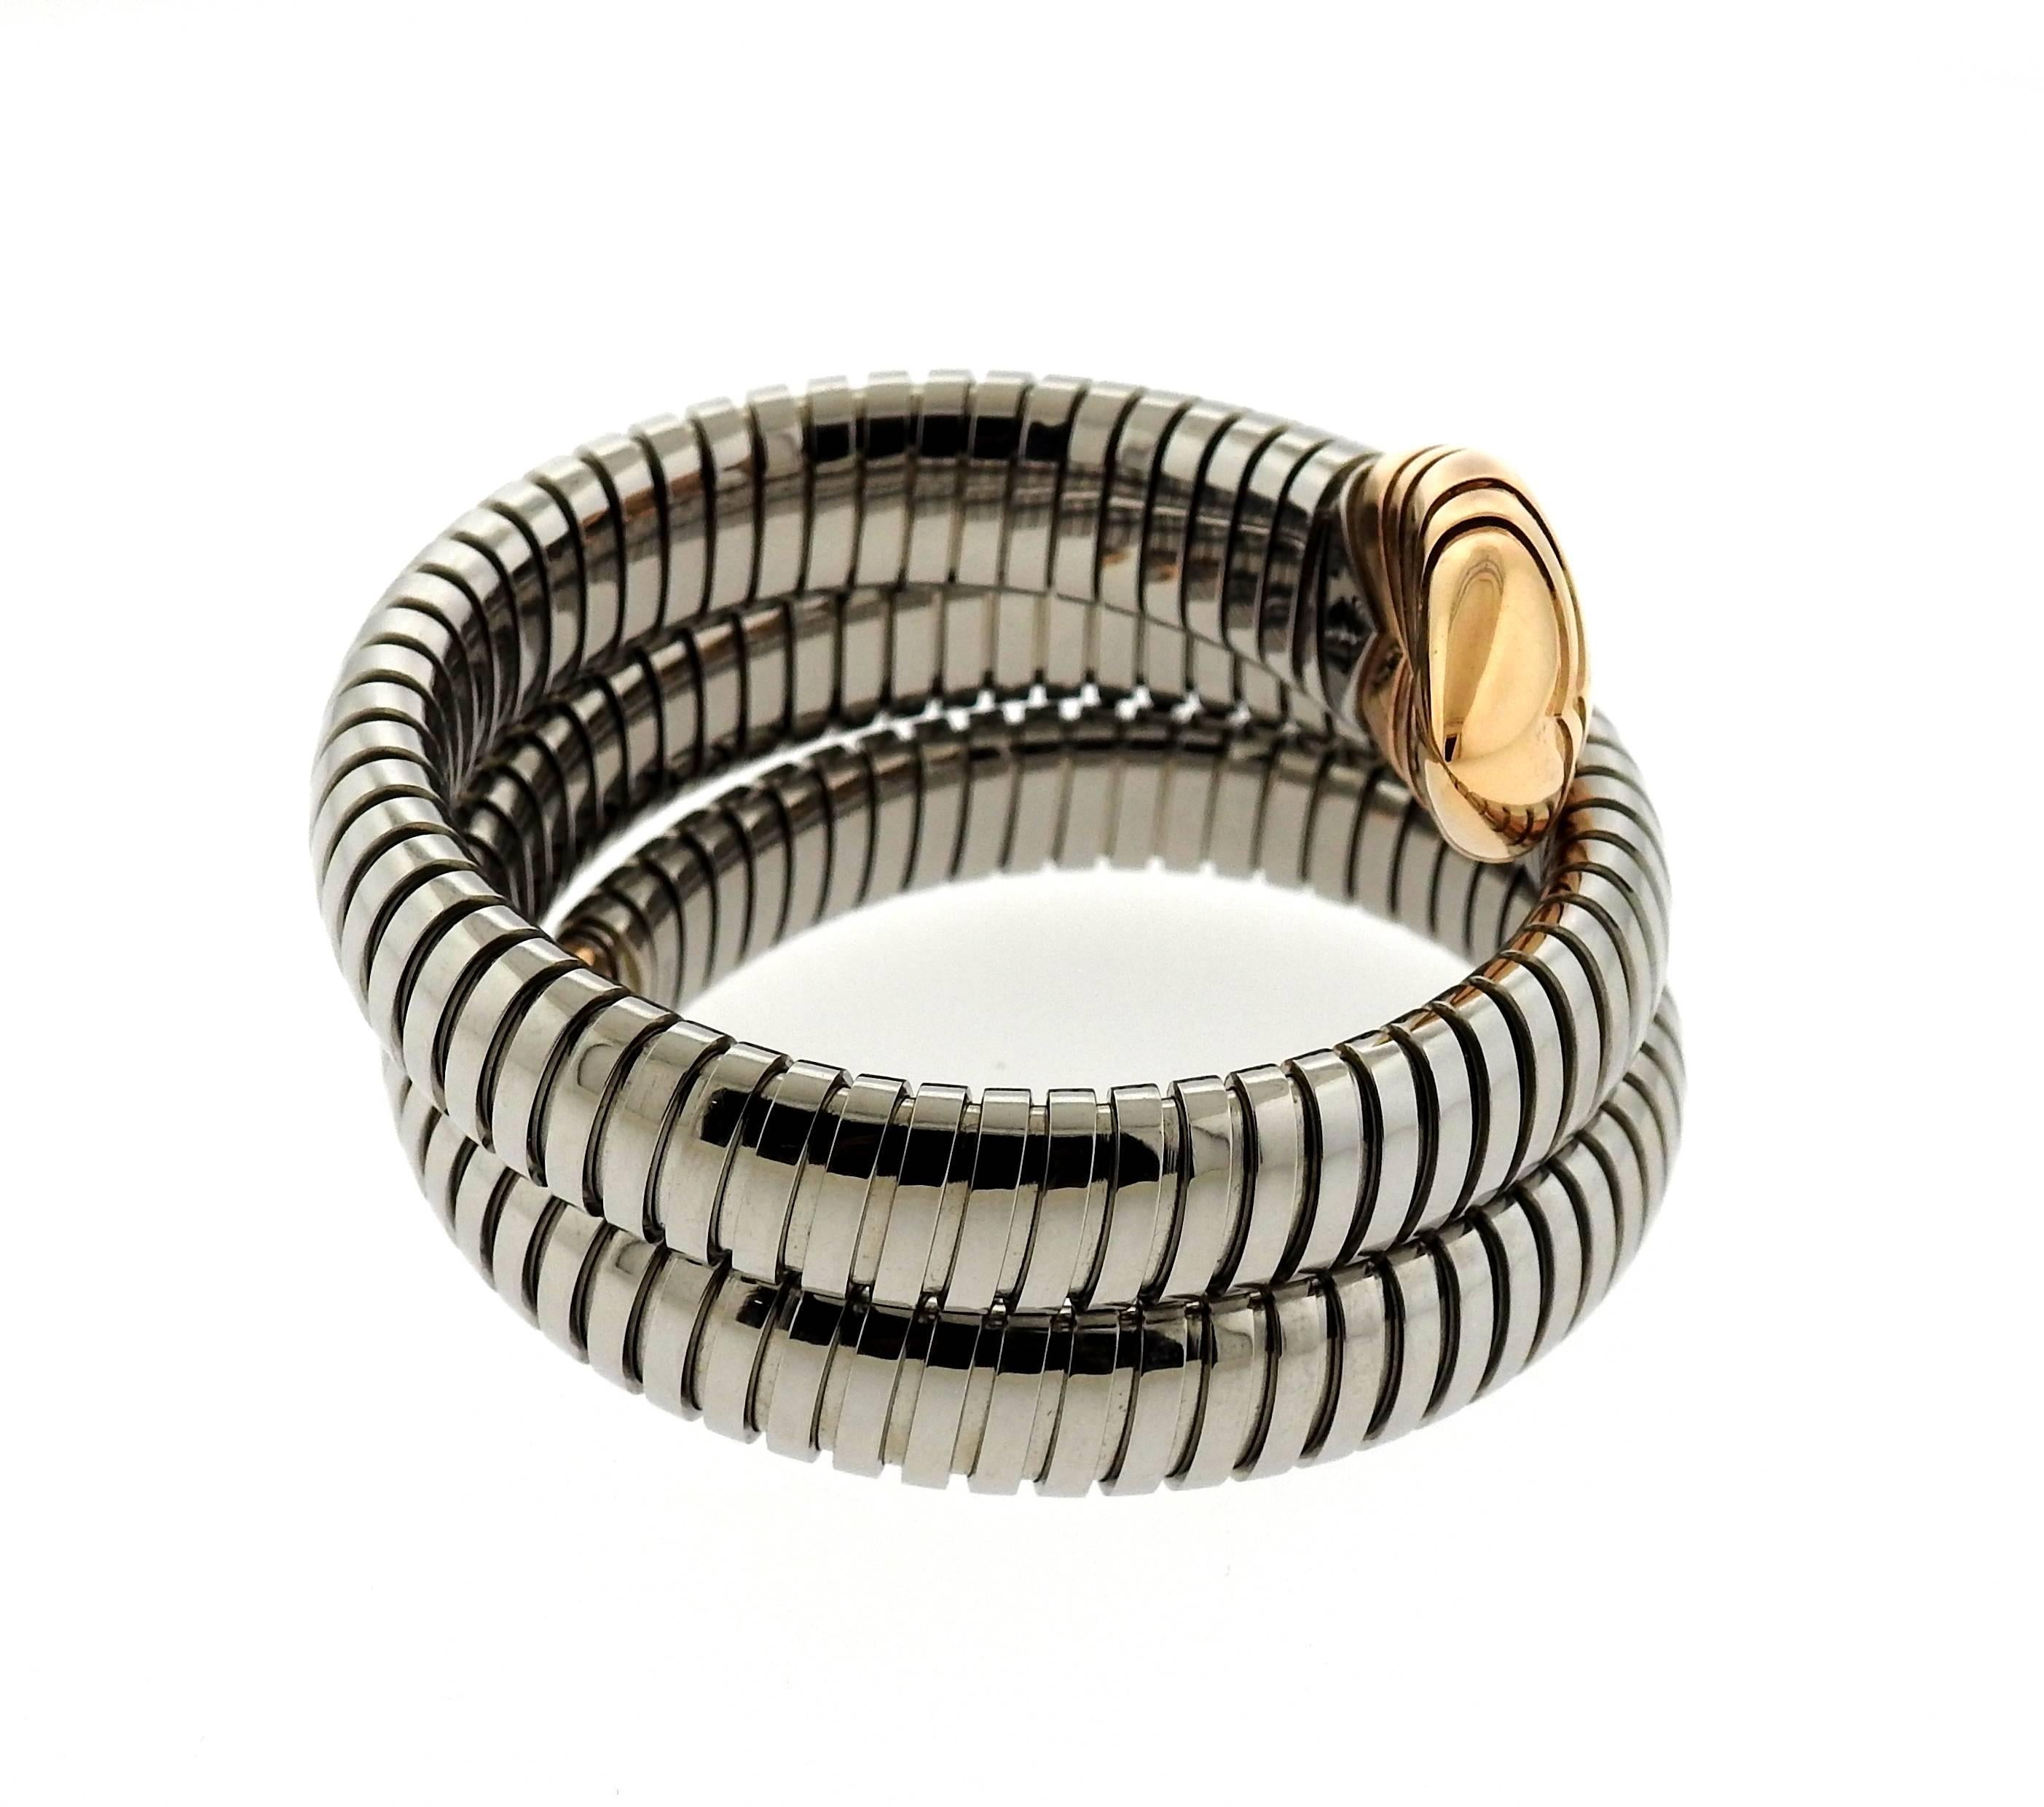 An 18k gold and stainless steel tubogas bracelet.  The bracelet will fit up to a 6 1/2